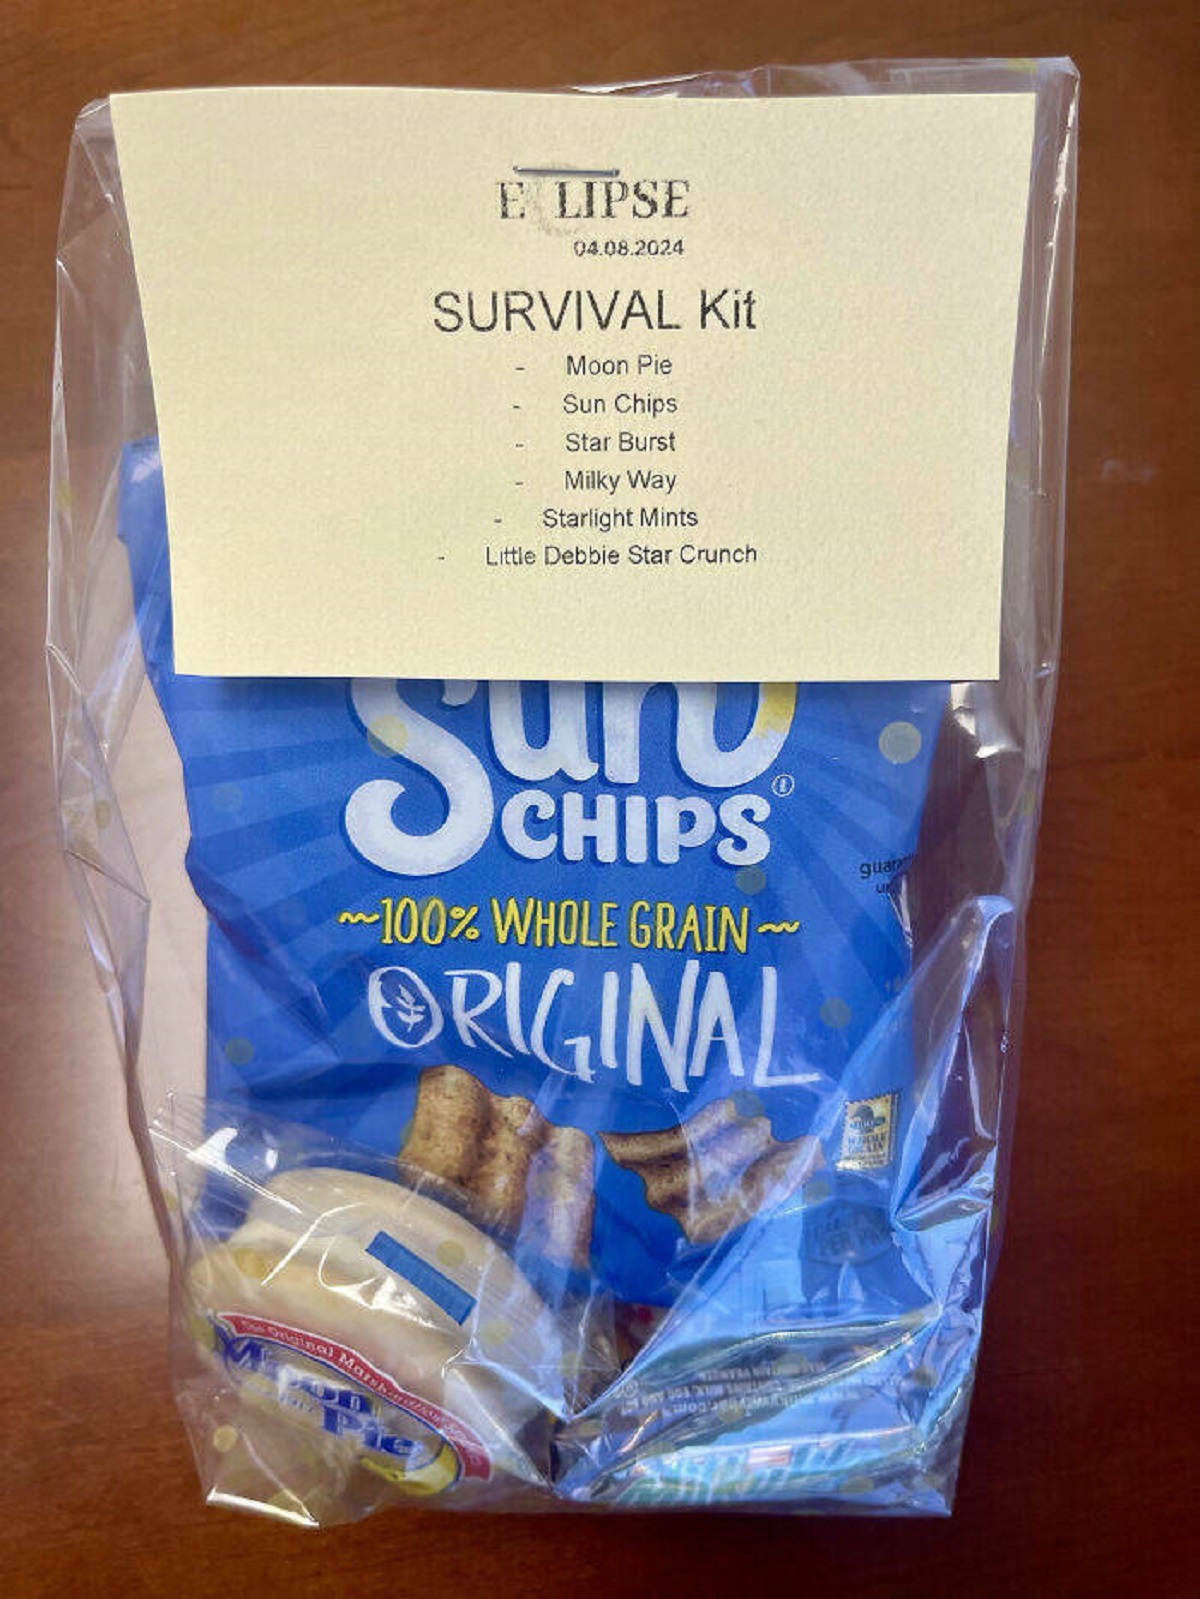 "This Eclipse Survival Goodie Bag Our Cfo Made For Everyone"